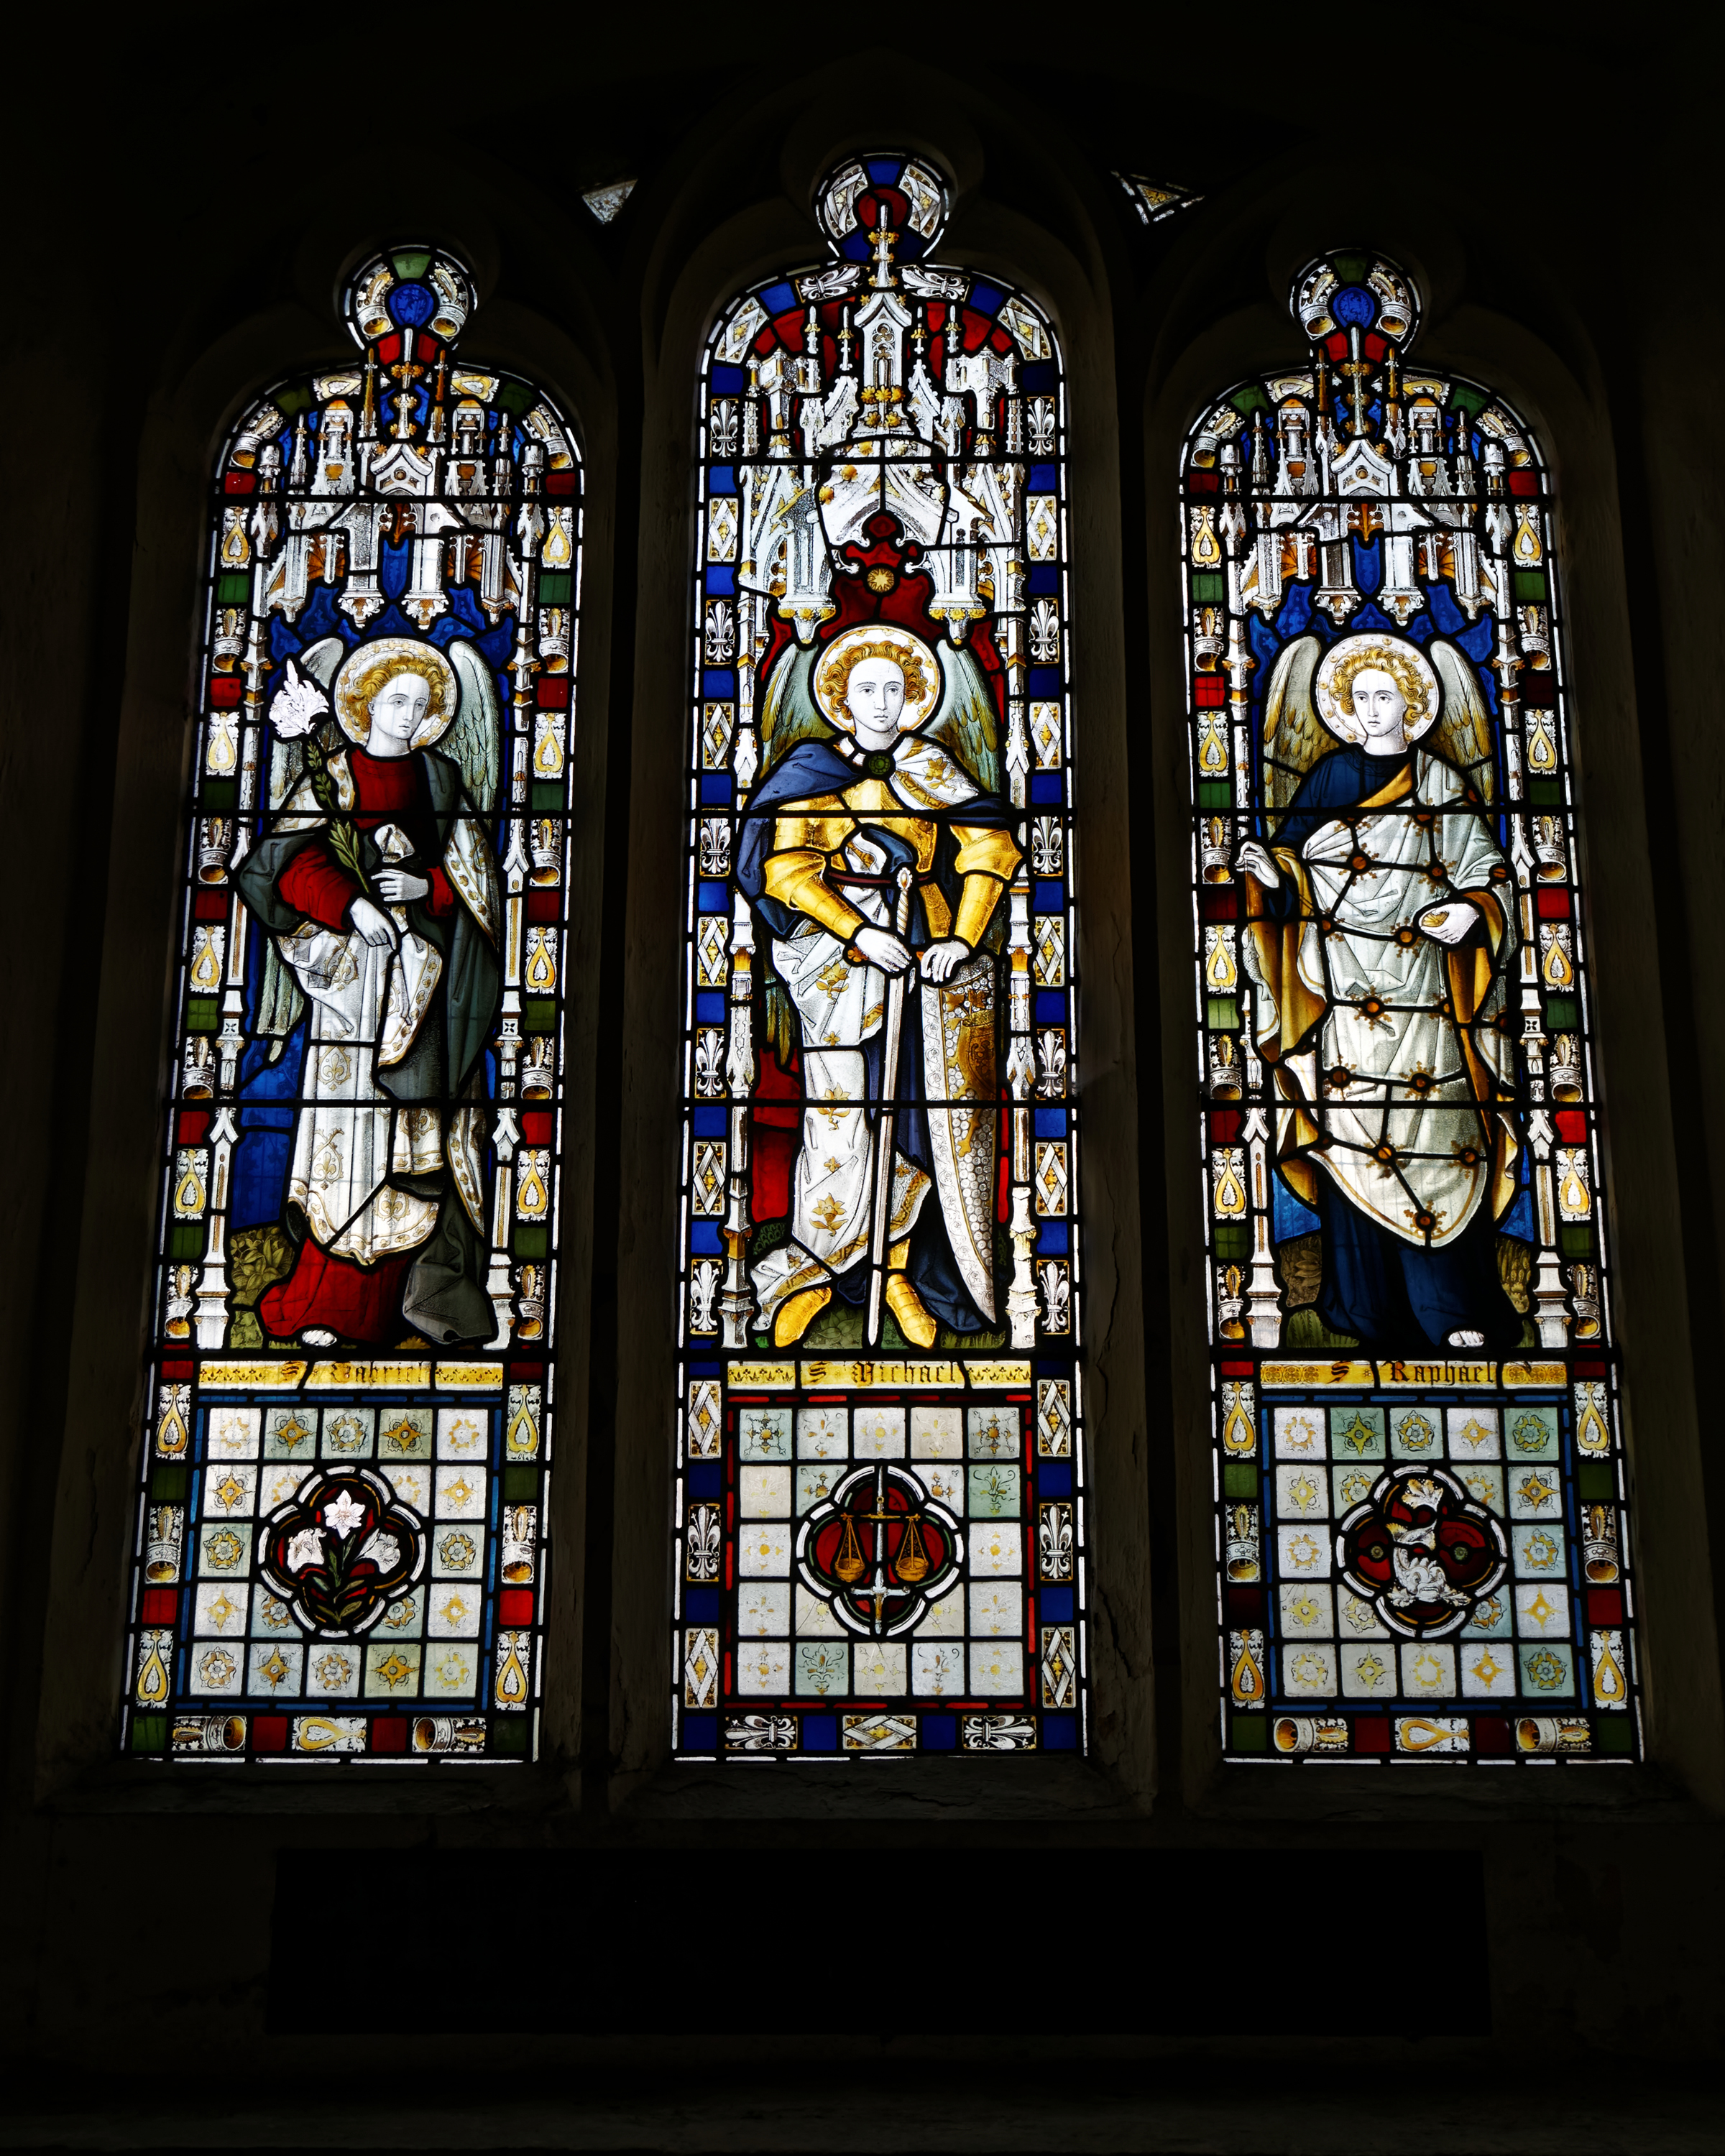 Beauchamp Roding - St Botolph's Church - Essex England - nave Gothic Revival northeast window